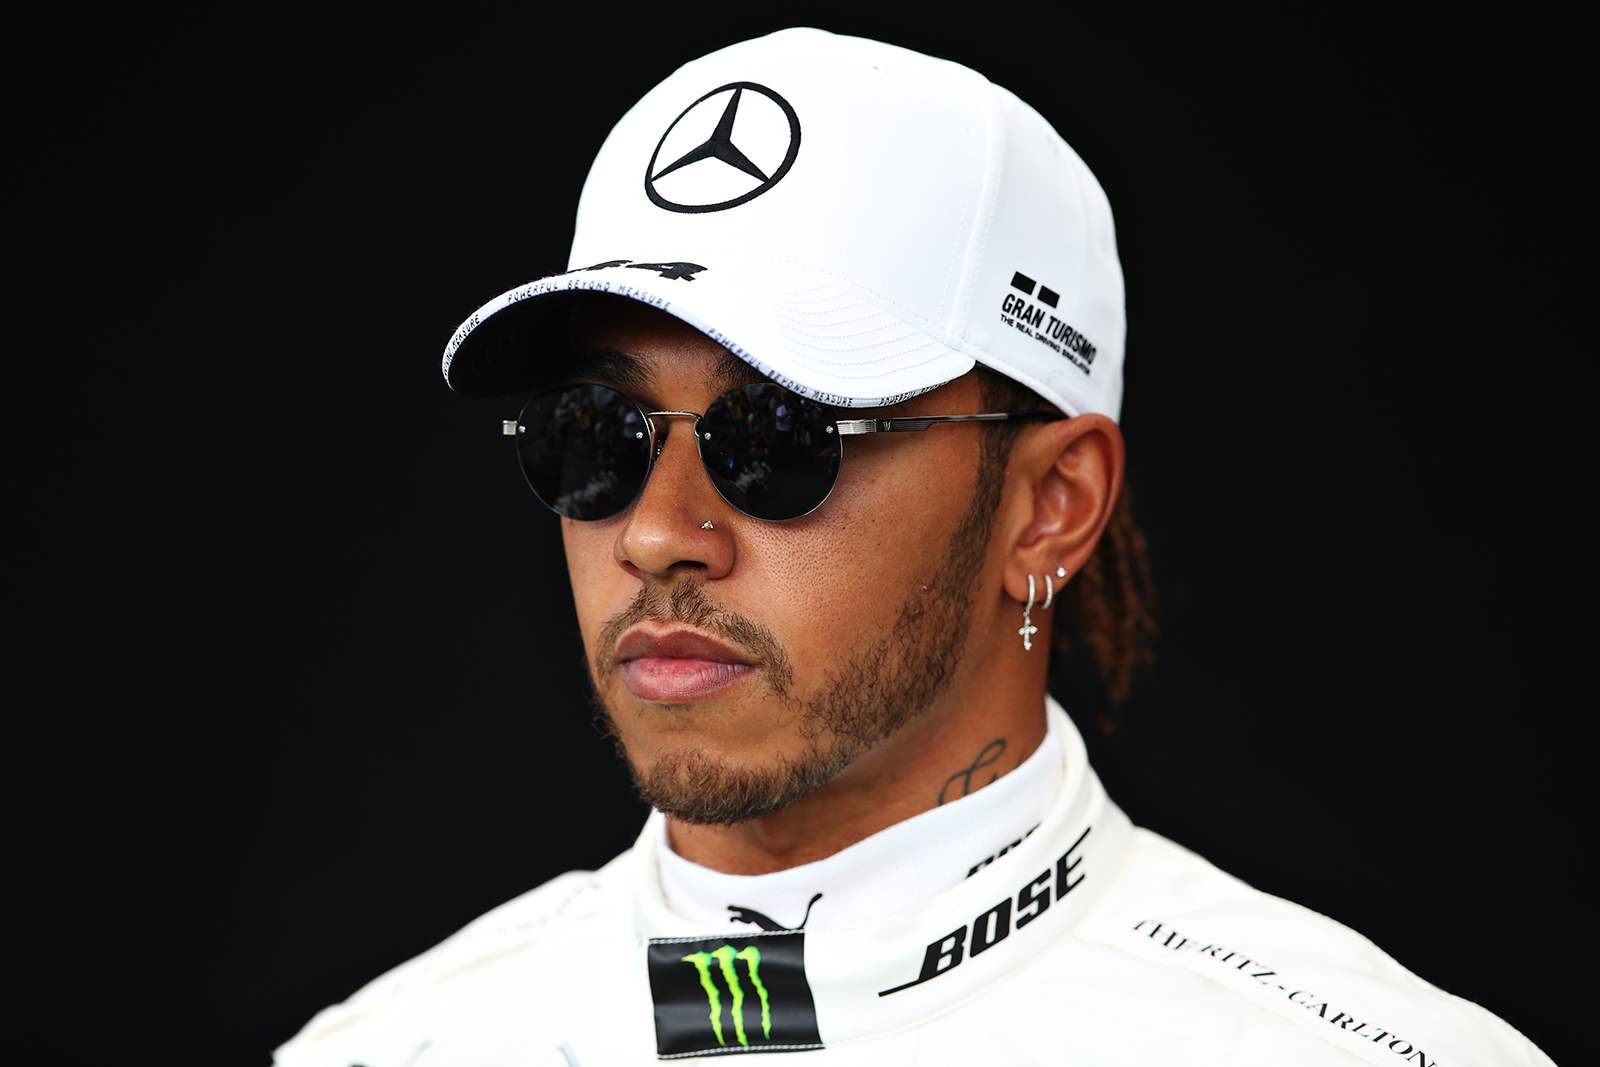 Lewis Hamilton poses for a photo ahead of the F1 Grand Prix of Australia on Thursday, March 12, in Melbourne.